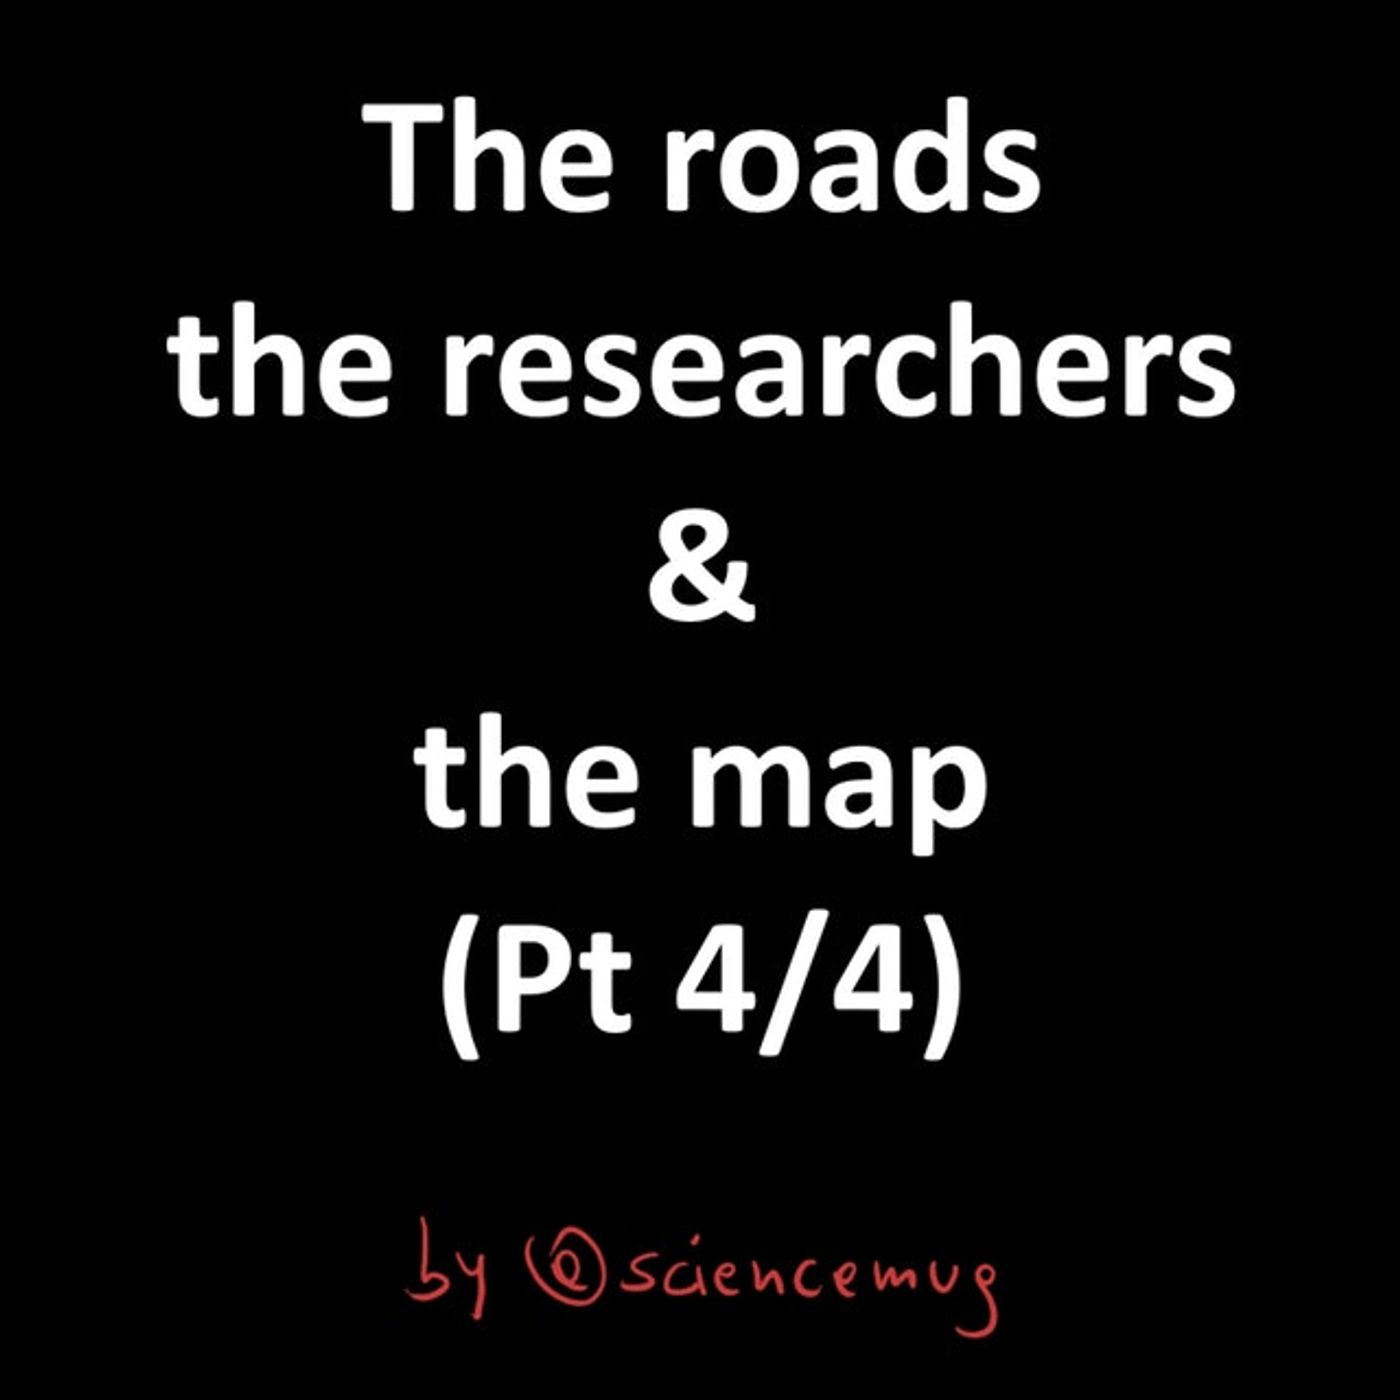 The roads the researchers & the map (Pt 4/4)